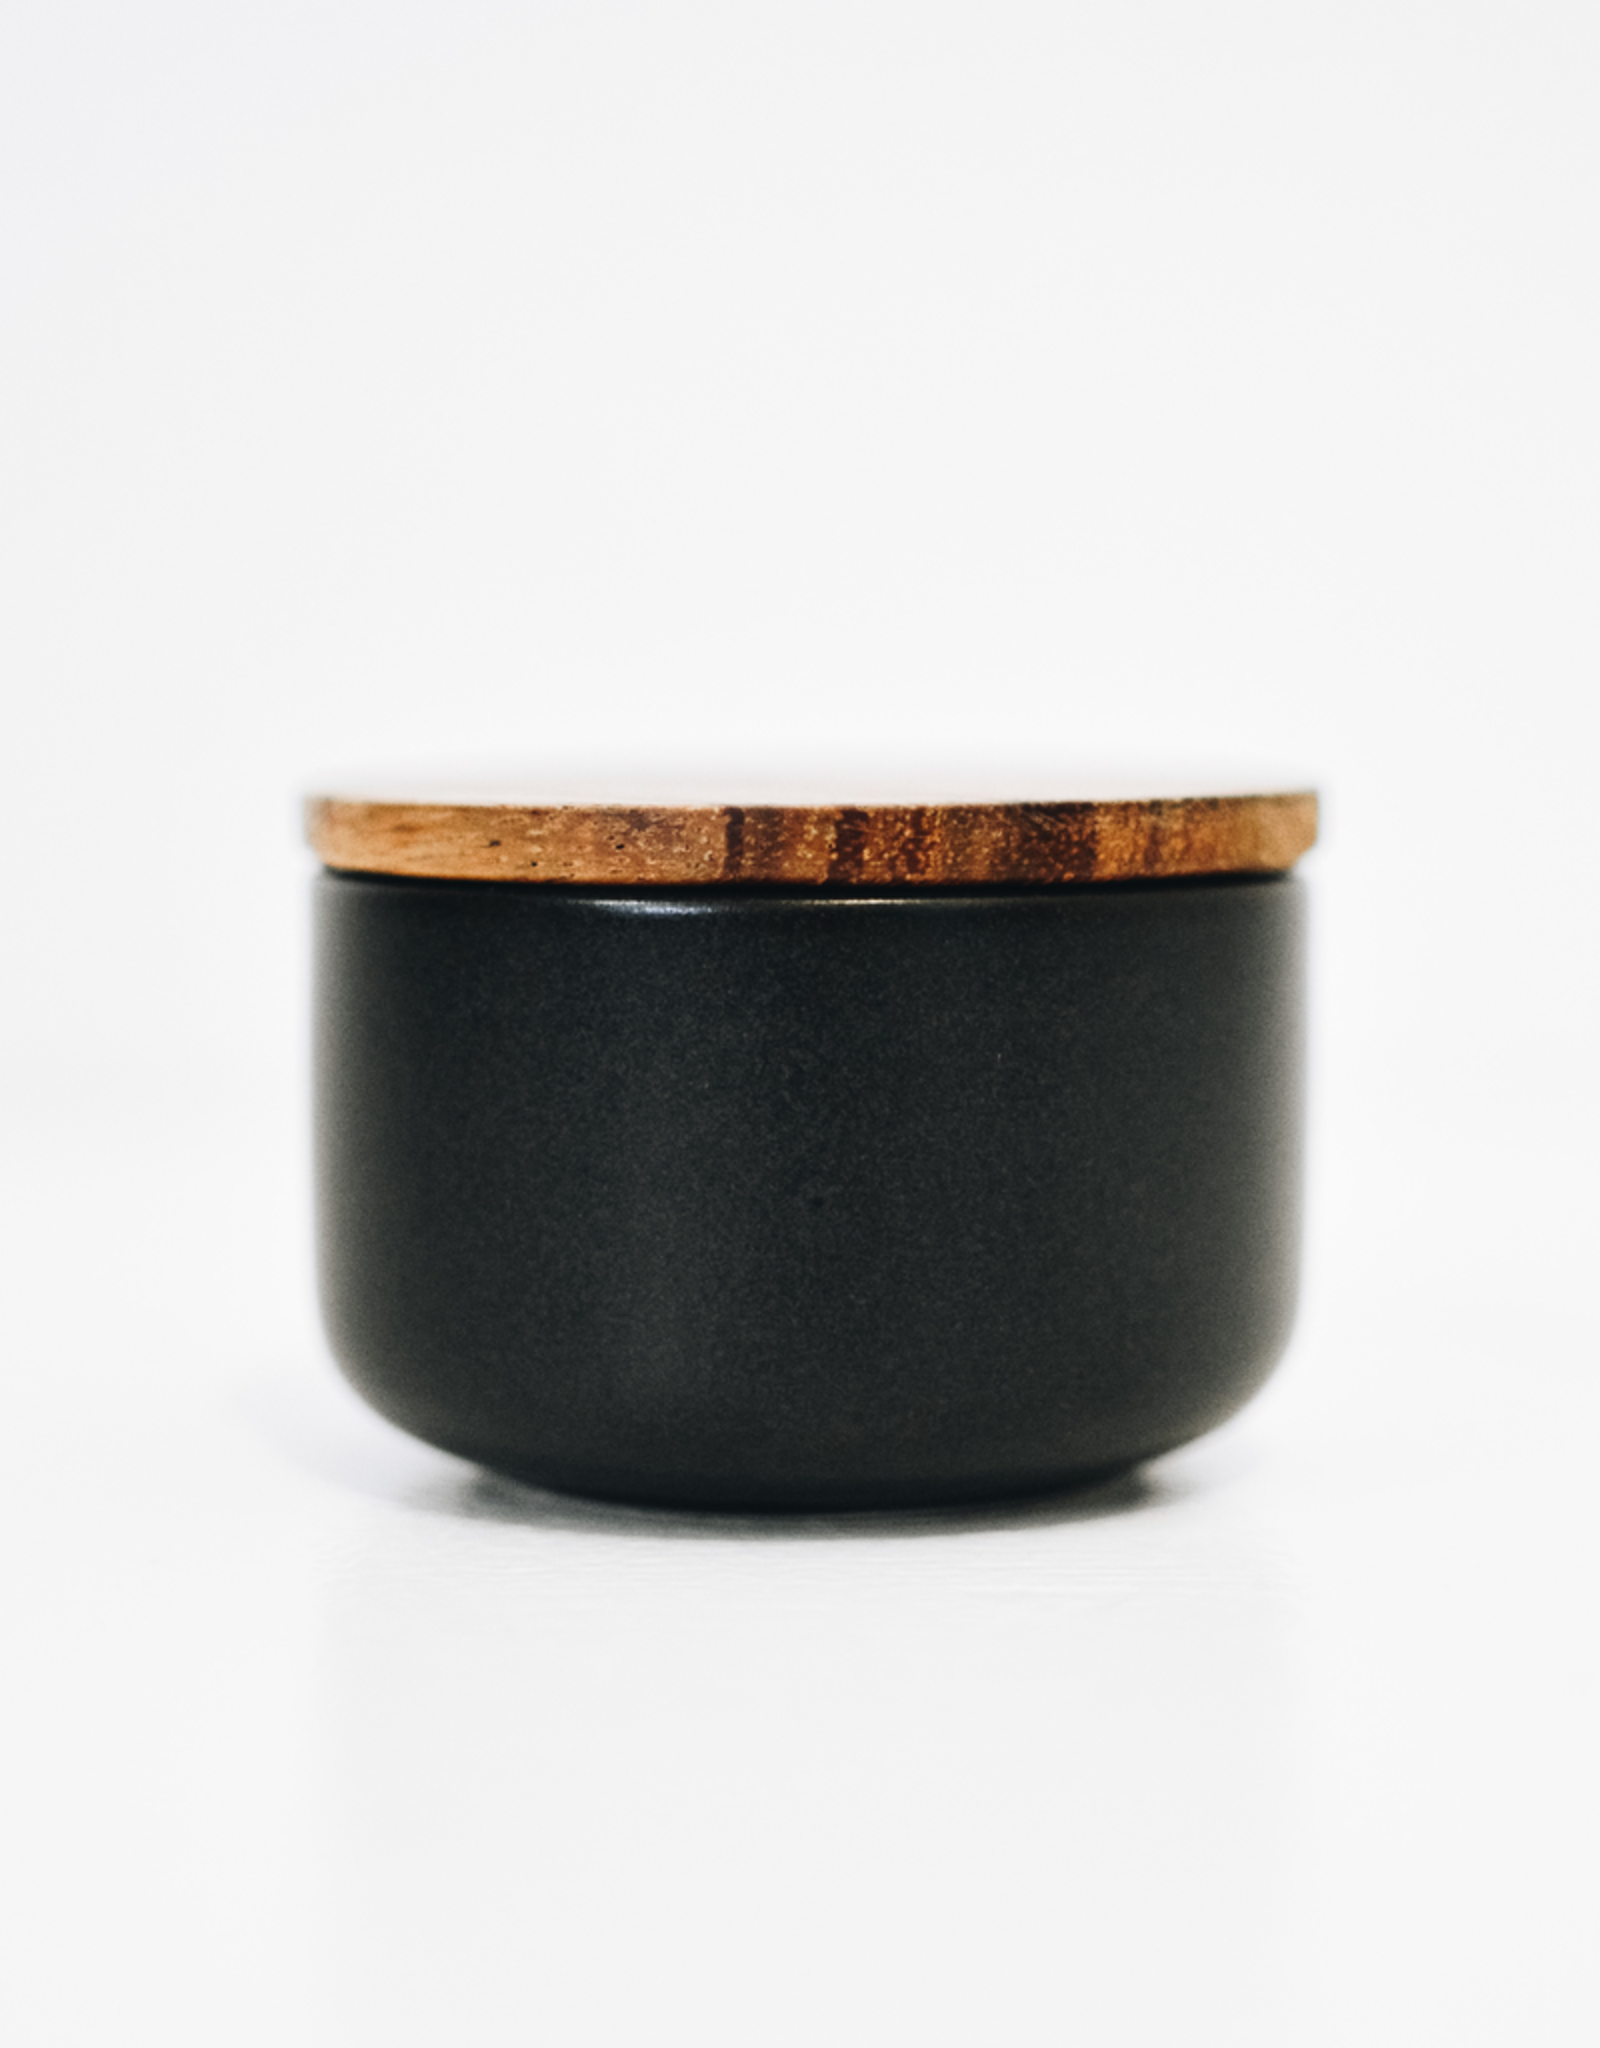 XSmall Black Stoneware Container with Acacia Lid D2.75" H2"